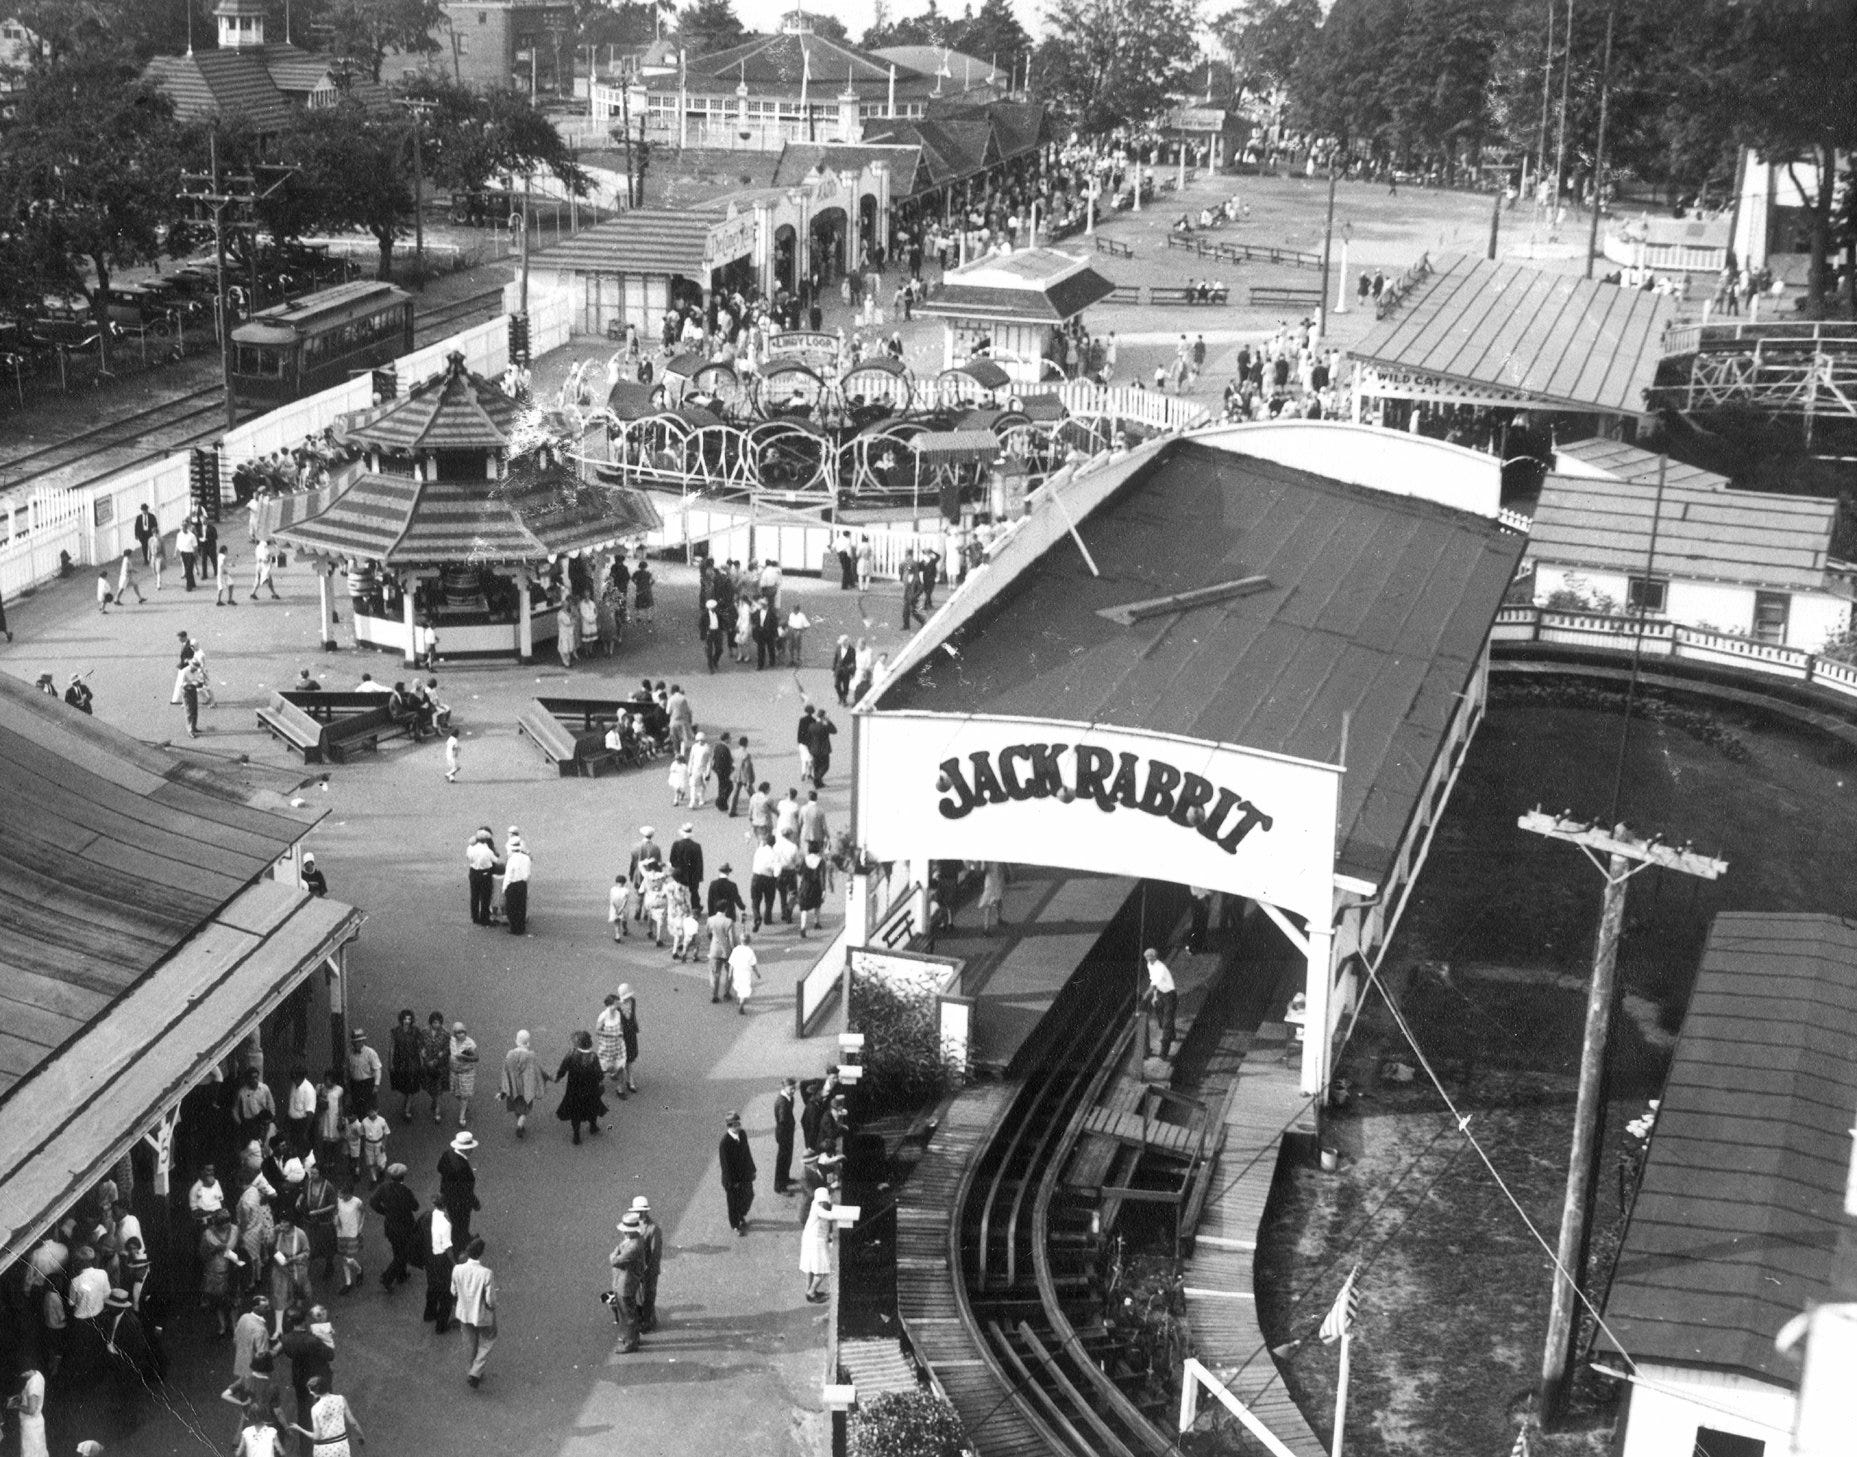 Seabreeze Amusement Park back in the 1920s